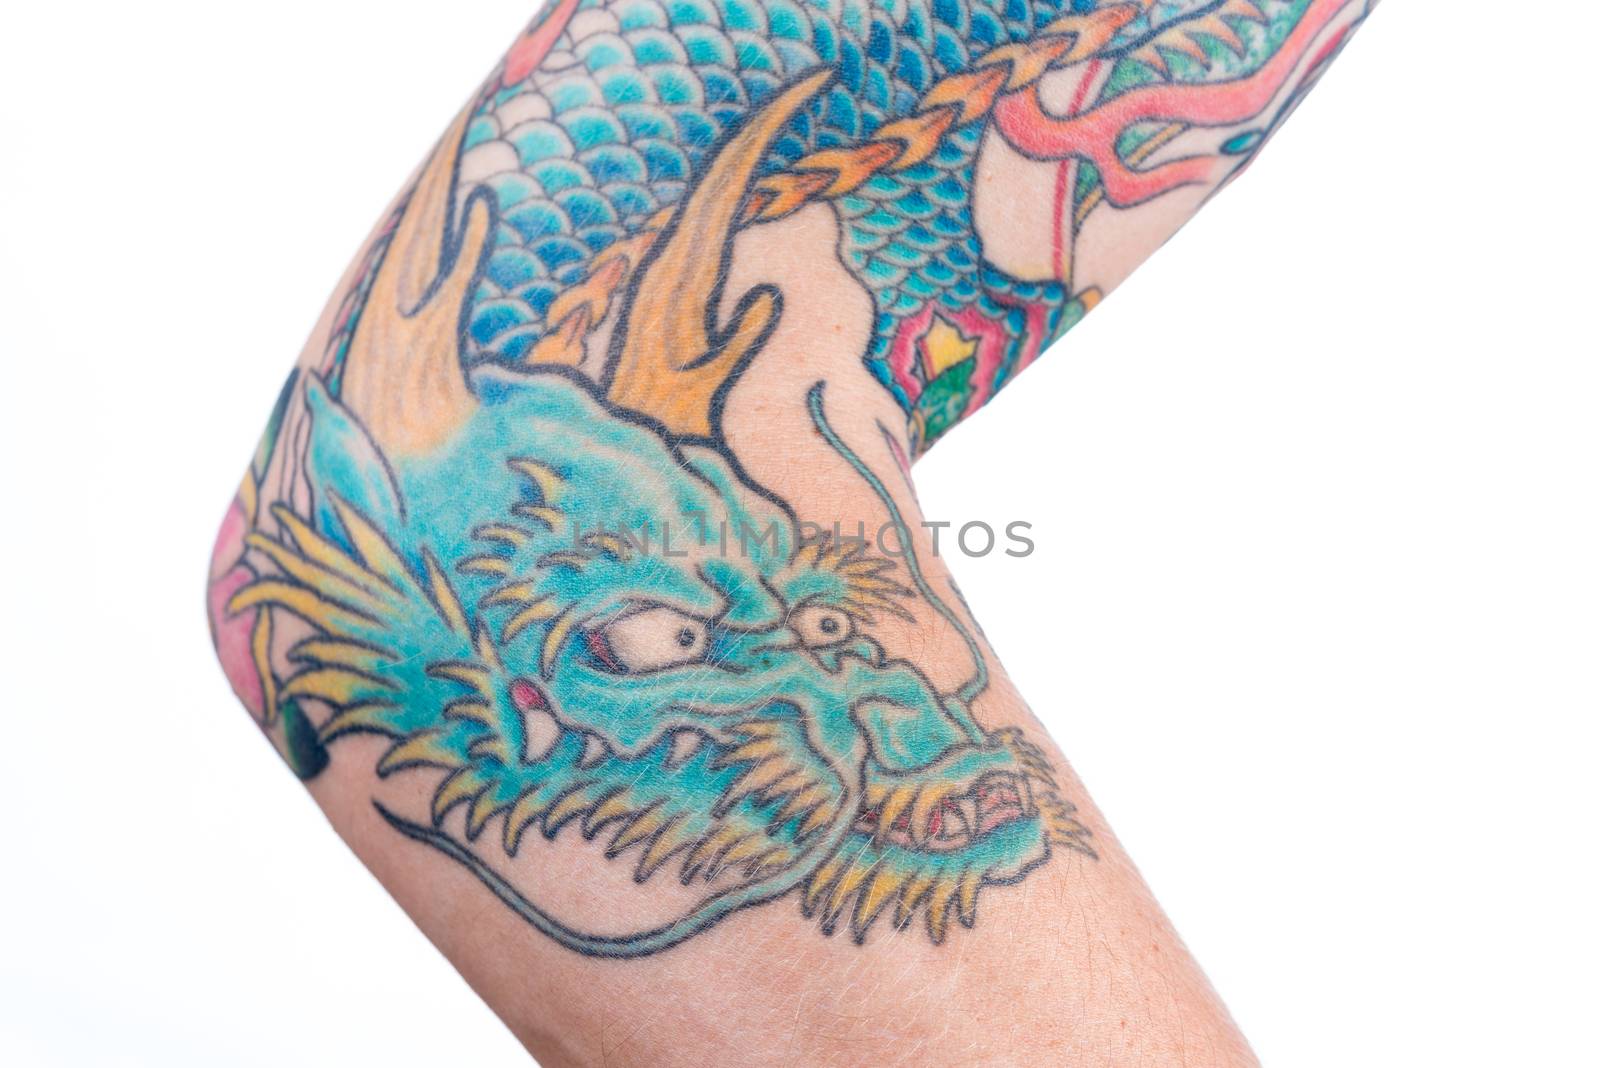 A detailed shot of a blue/green dragon tattoo in Japanese style on the forearm, elbow and bicep of a white male isolated on a white background.